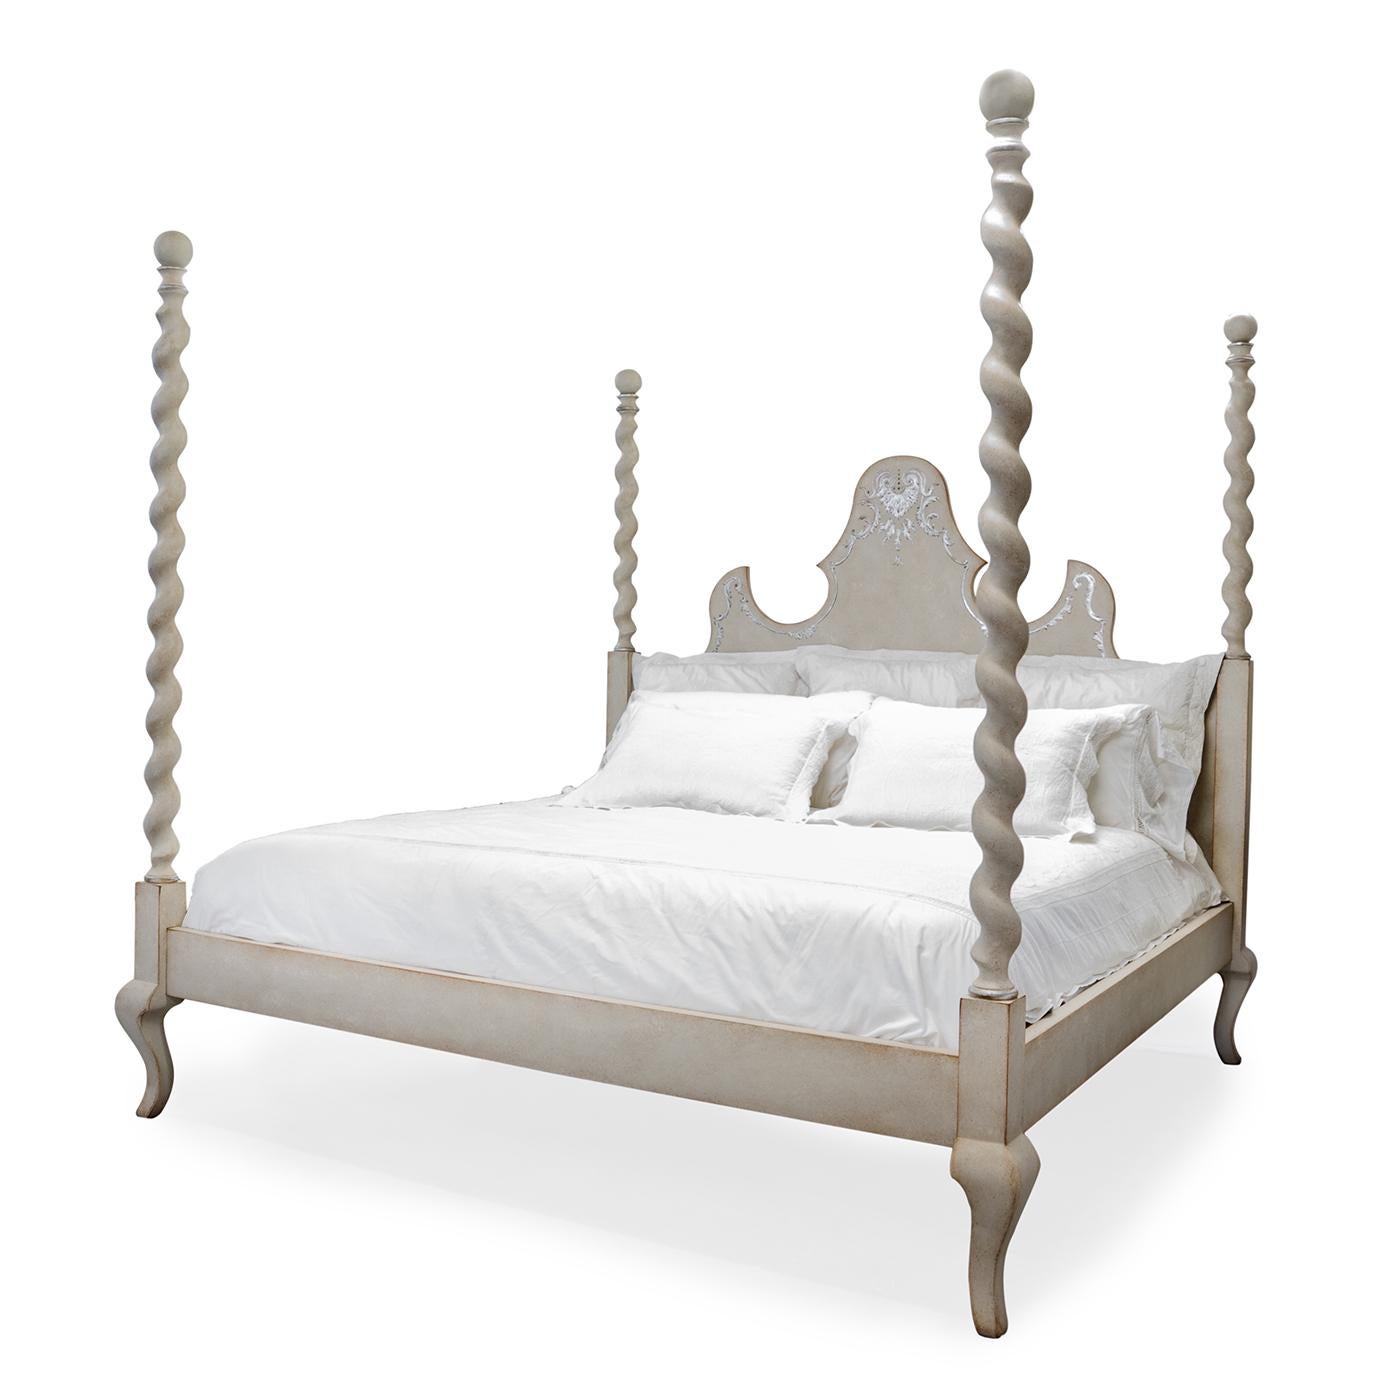 Introducing Giotto Bed, a stunning embodiment of romance and timeless elegance. Crafted in the style of a four-poster bed, this piece exudes grandeur and sophistication. With meticulous hand-painted details in flex color and silver textural